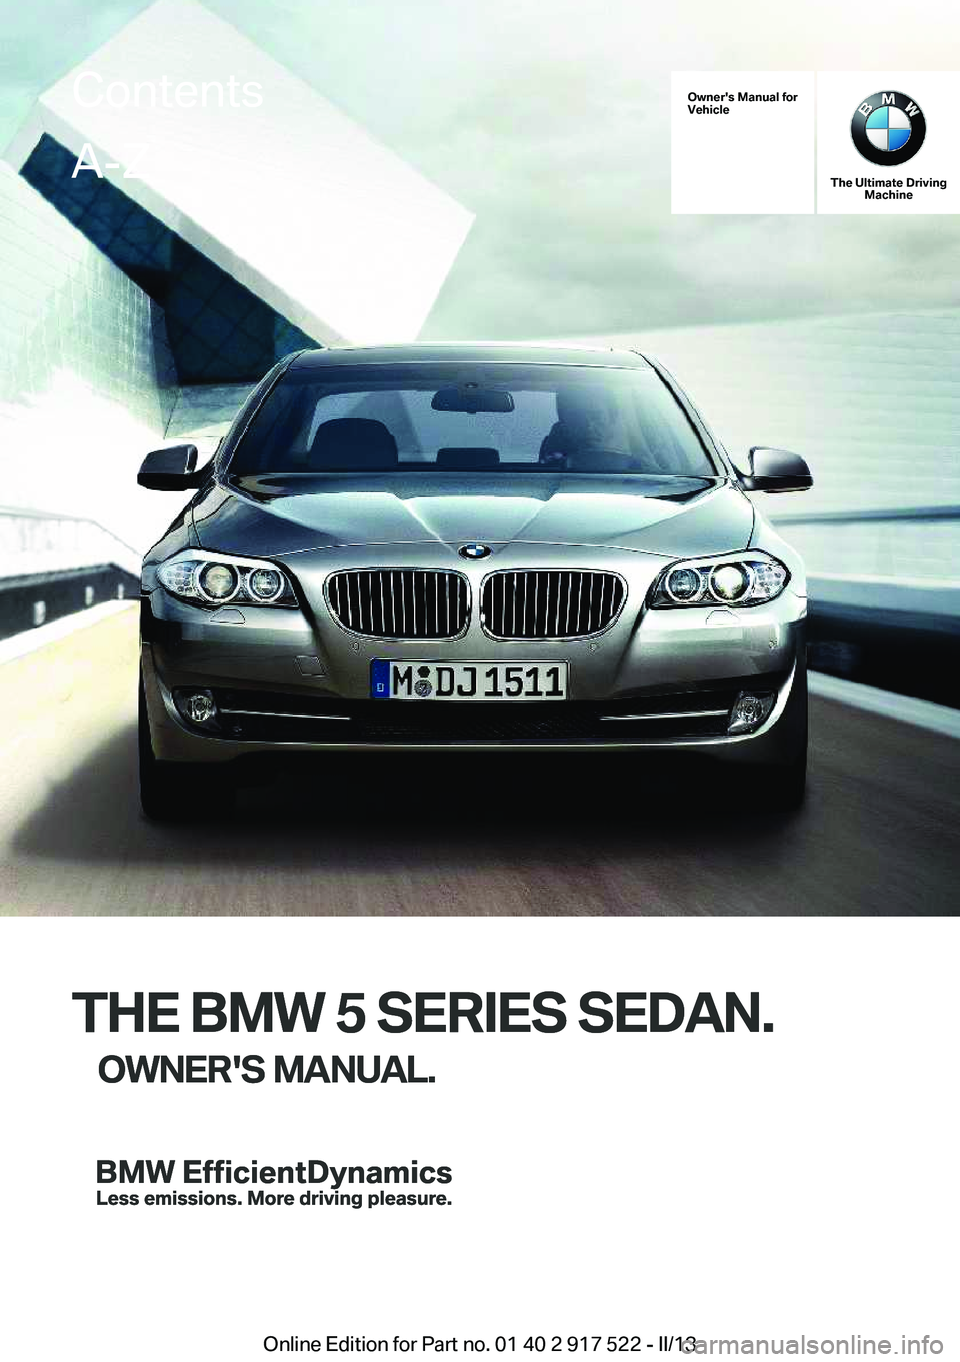 BMW 550I 2013  Owners Manual Owner's Manual for
Vehicle
THE BMW 5 SERIES SEDAN.
OWNER'S MANUAL.
The Ultimate Driving Machine
THE BMW 5 SERIES SEDAN.
OWNER'S MANUAL.
ContentsA-Z
Online Edition for Part no. 01 40 2 917 